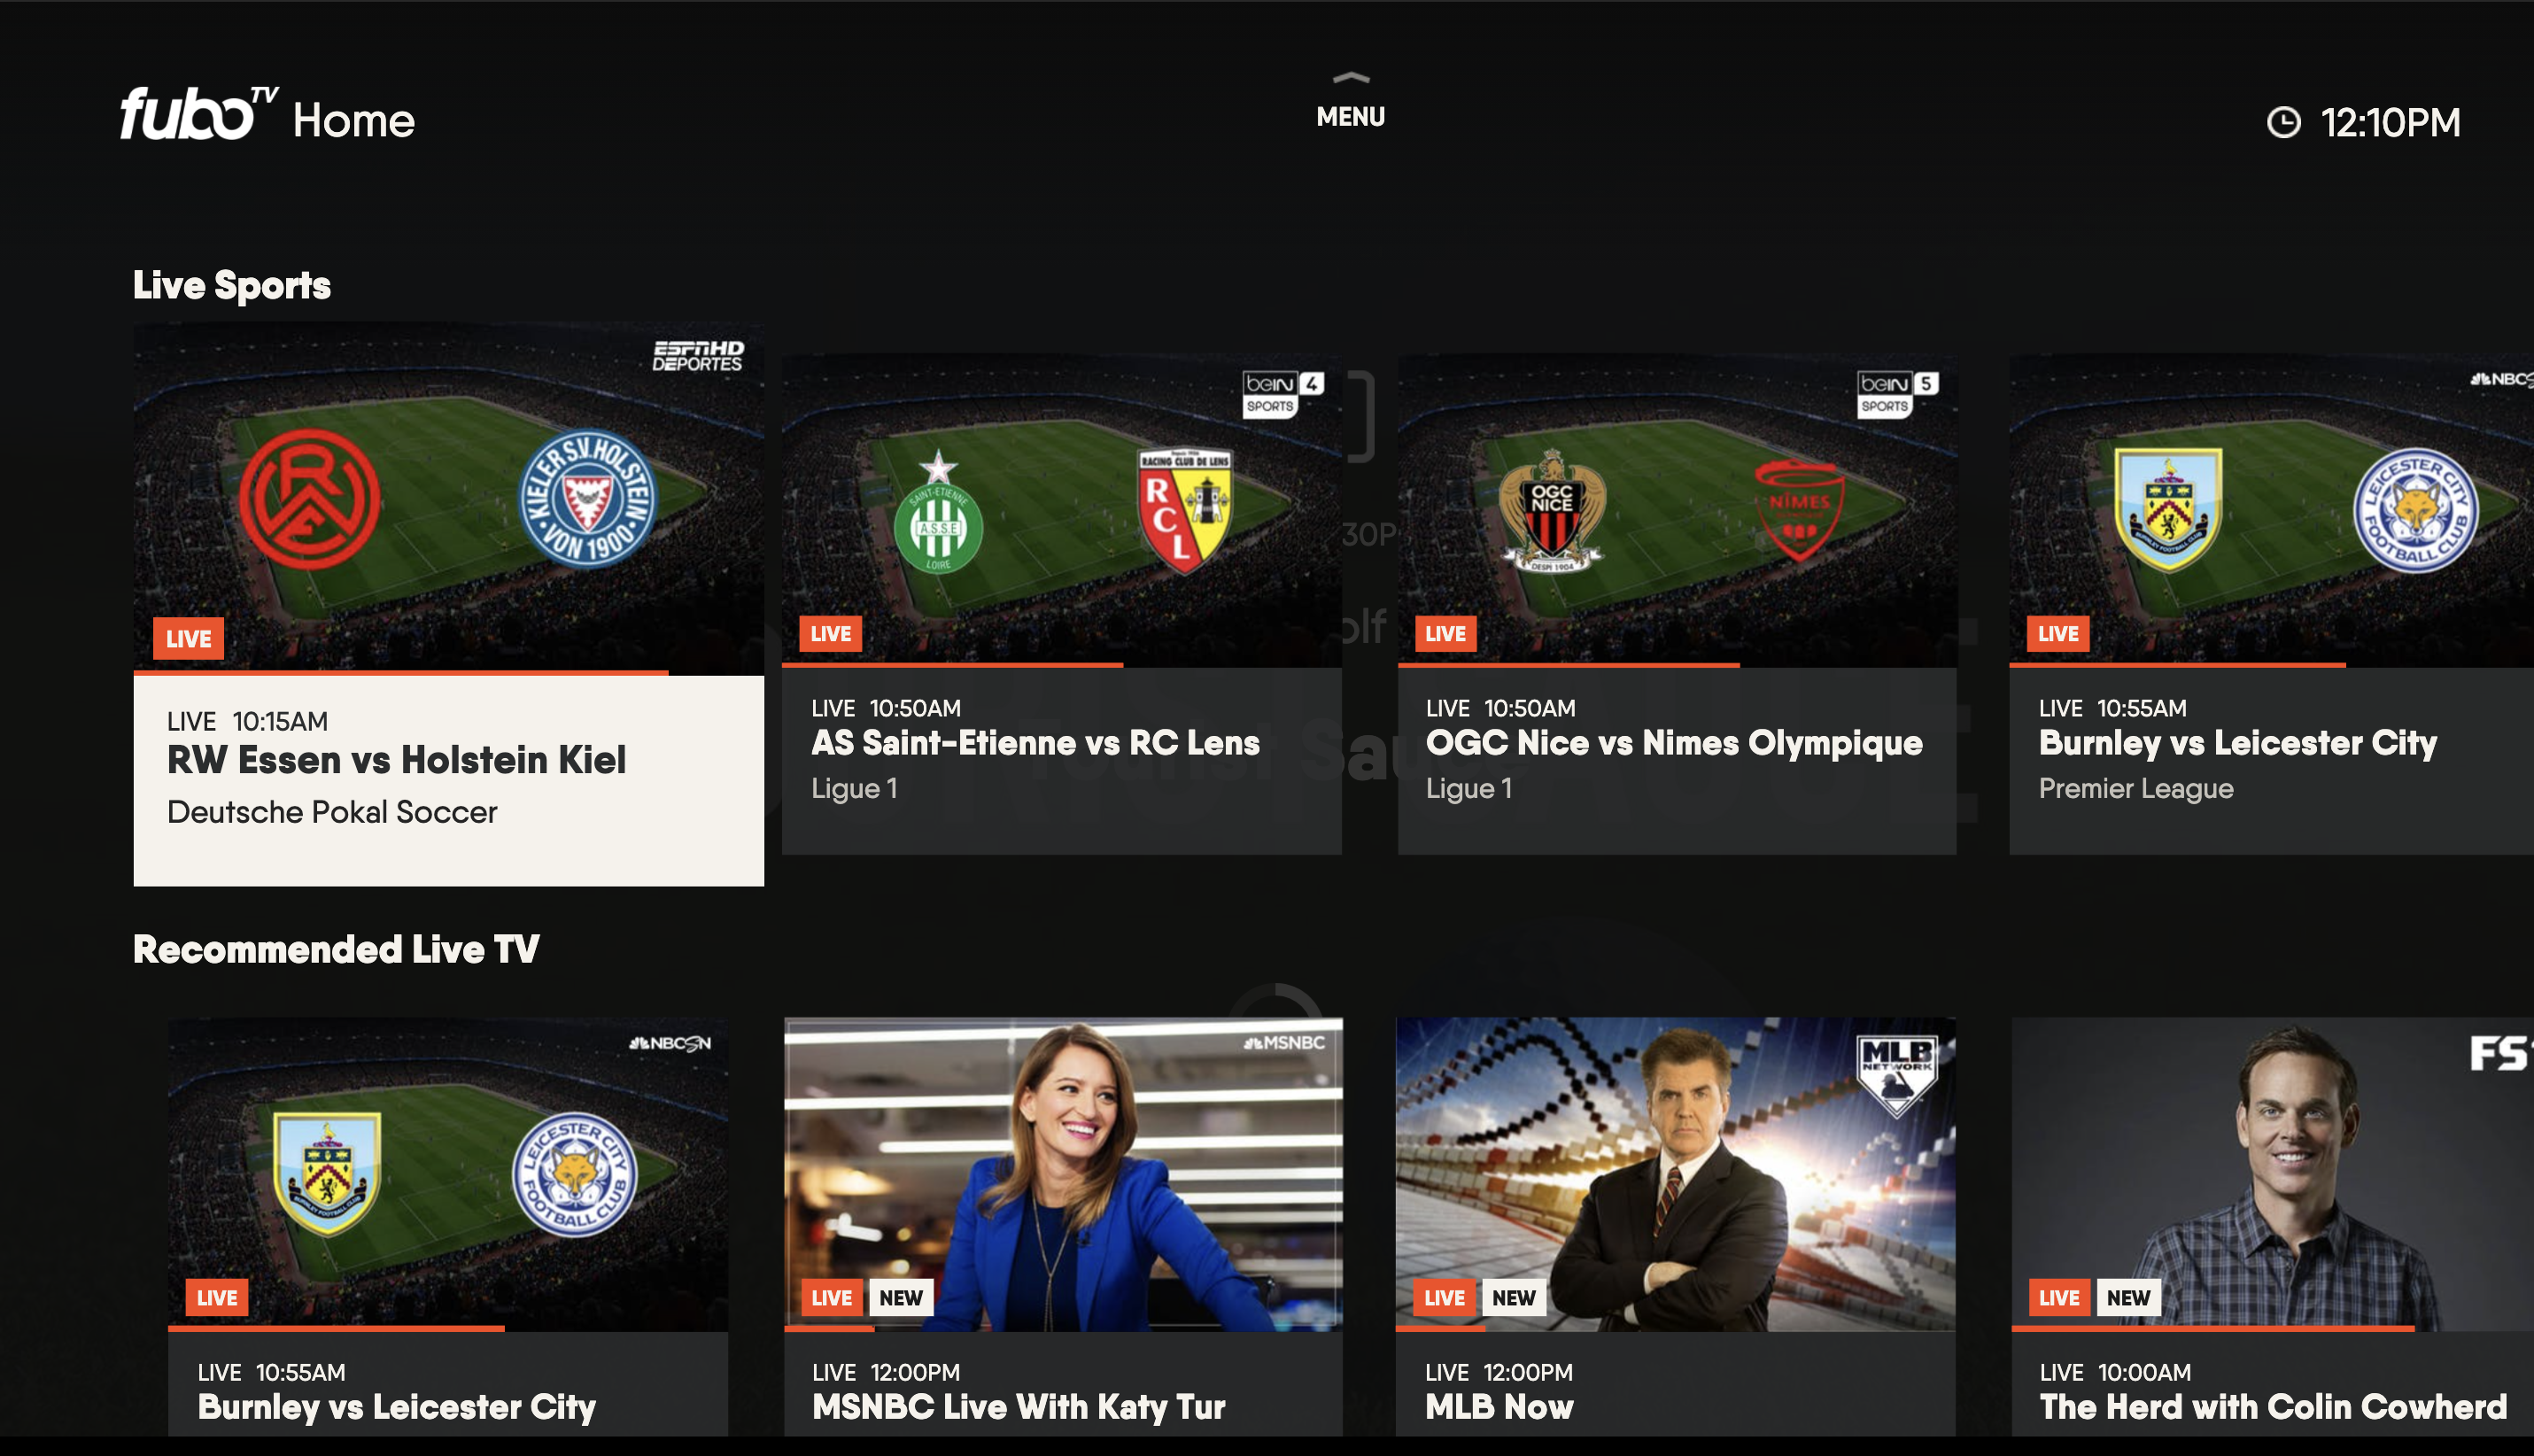 HOME screen of the FuboTV app on Xbox with LIVE SPORTS highlighted